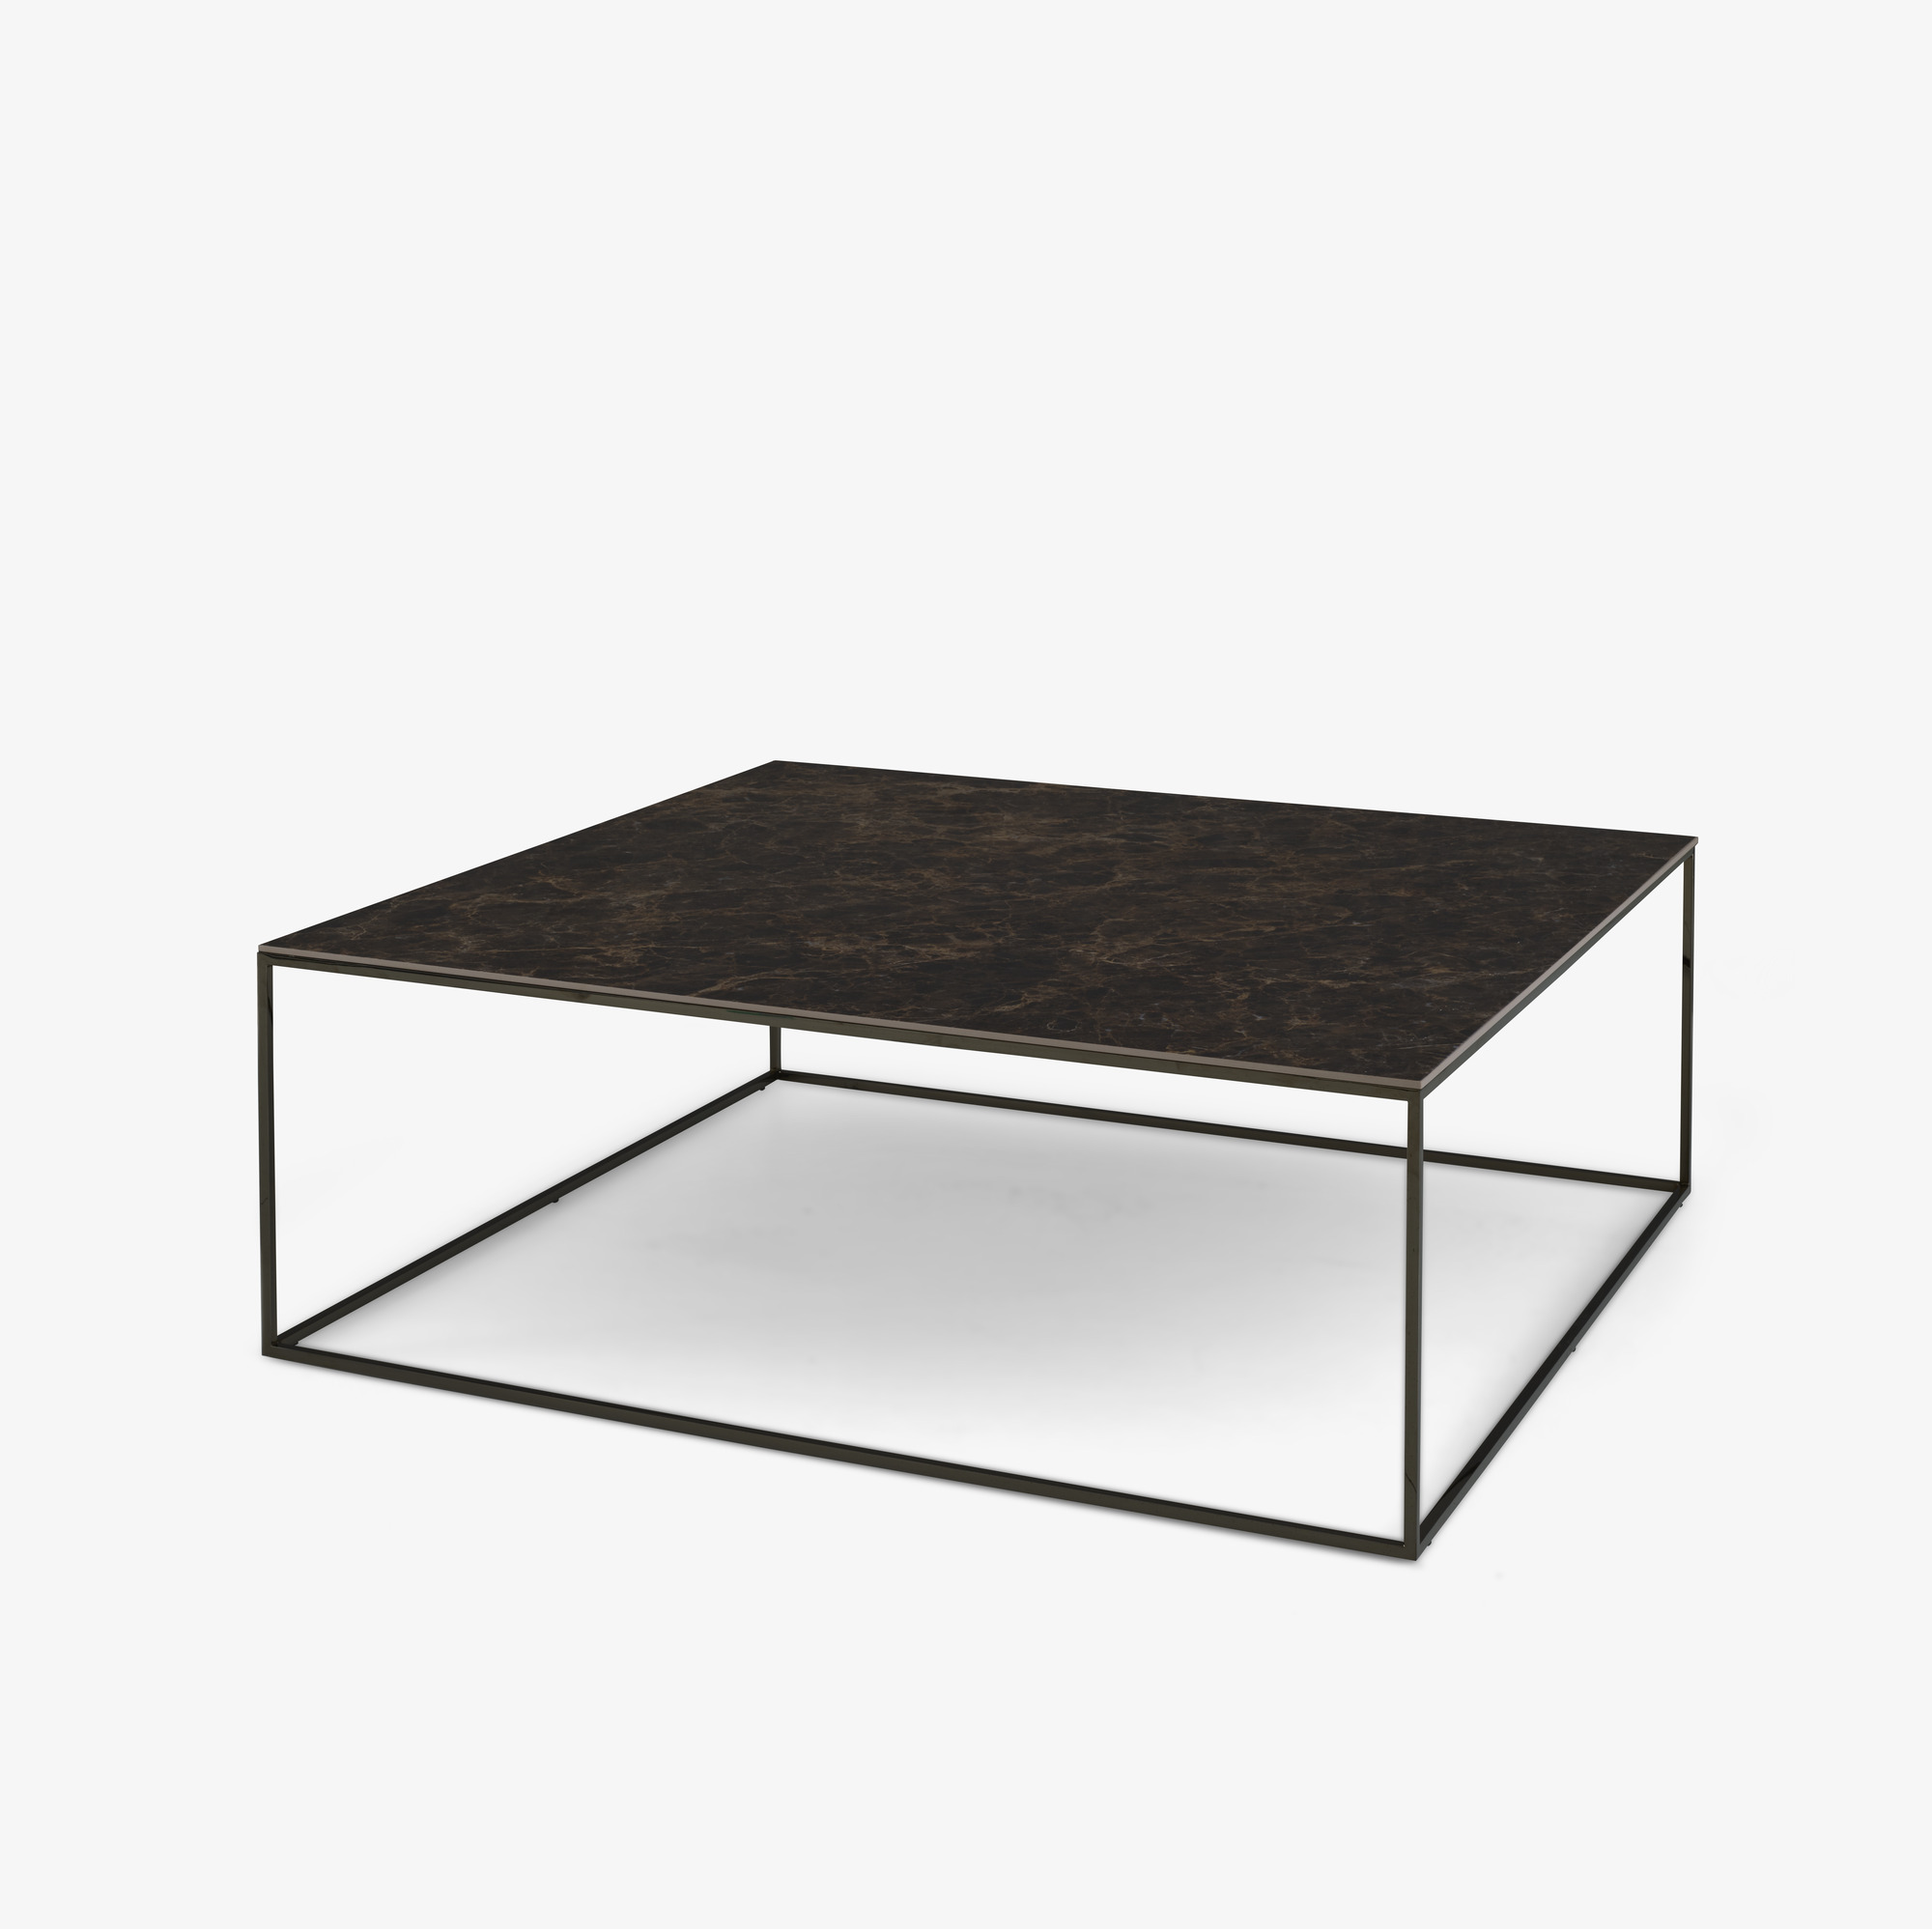 Image Coffee table - large - 2